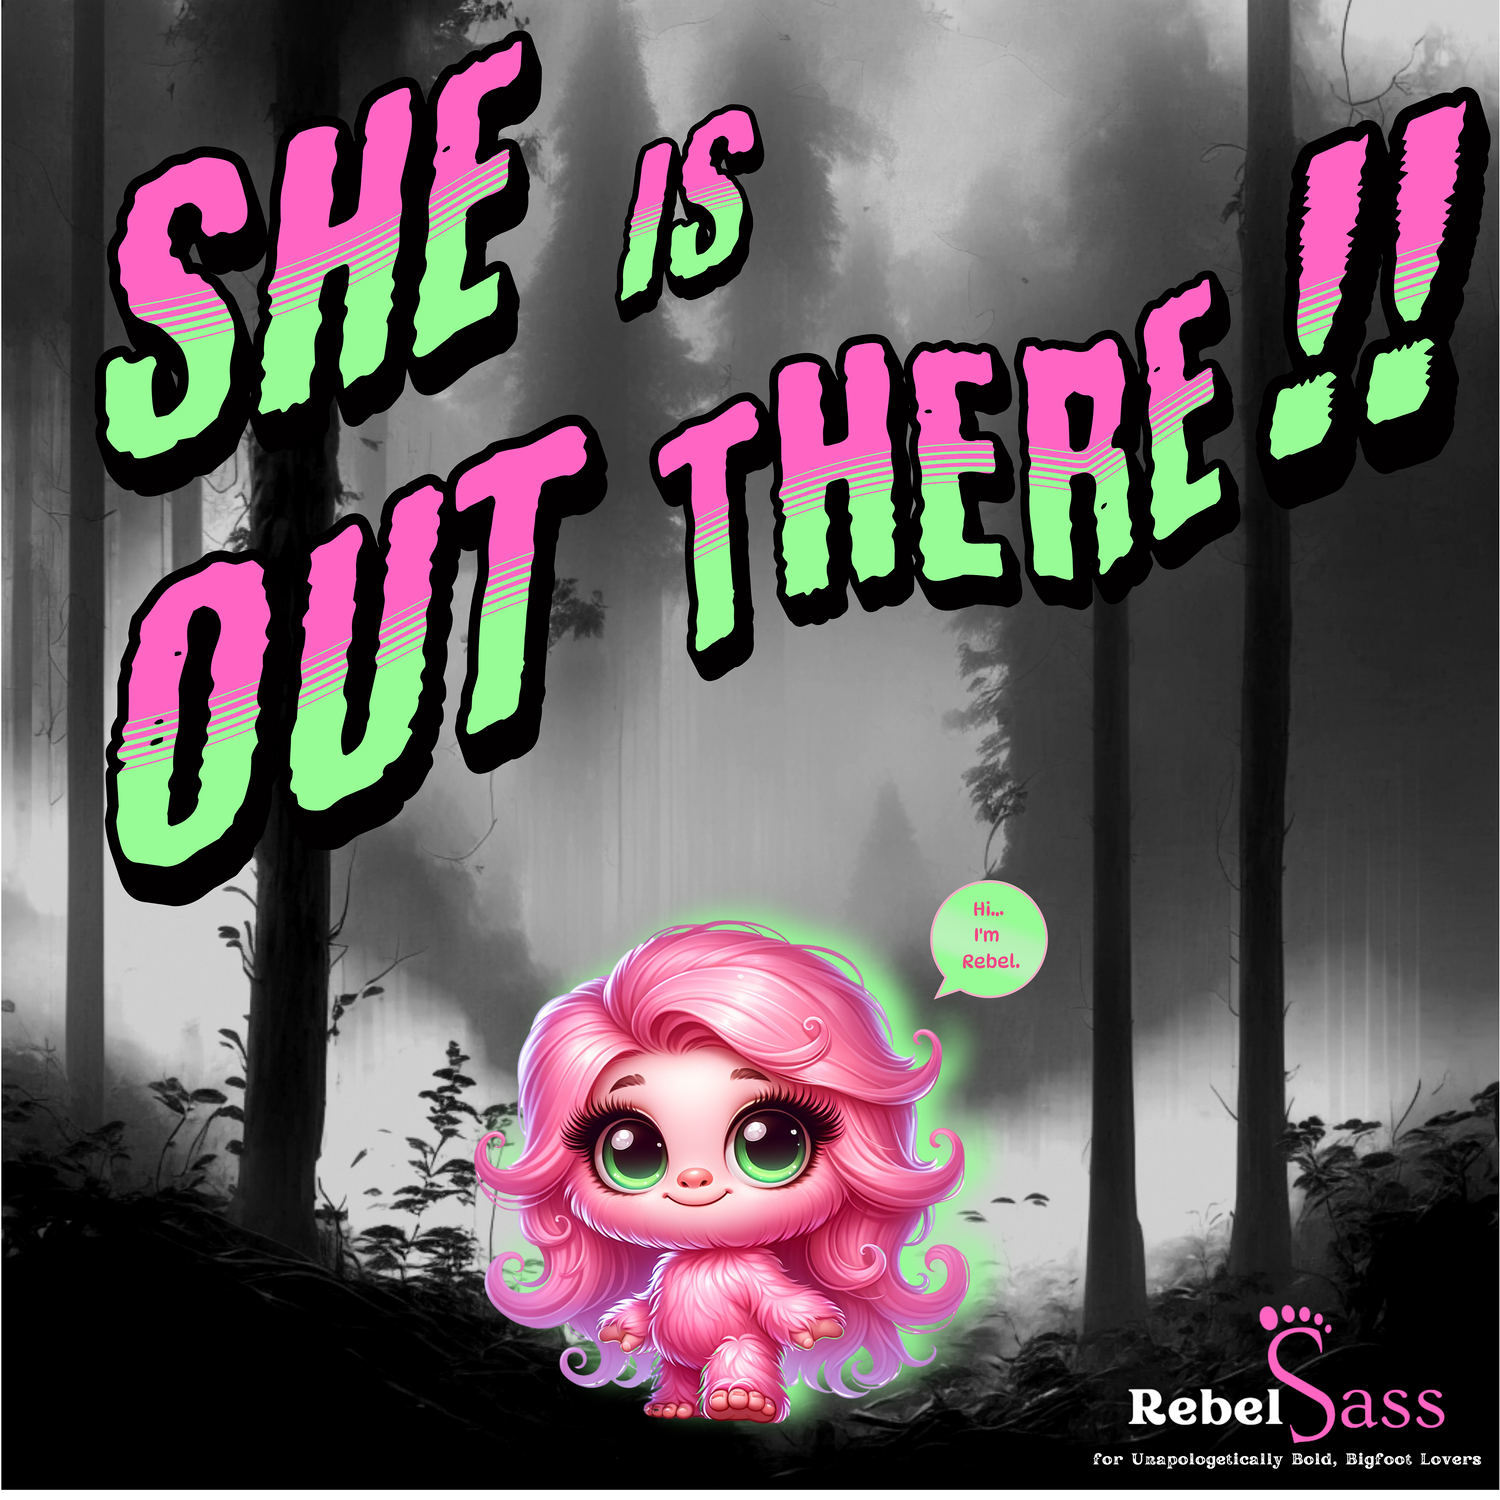 She Is Out There!! - Design